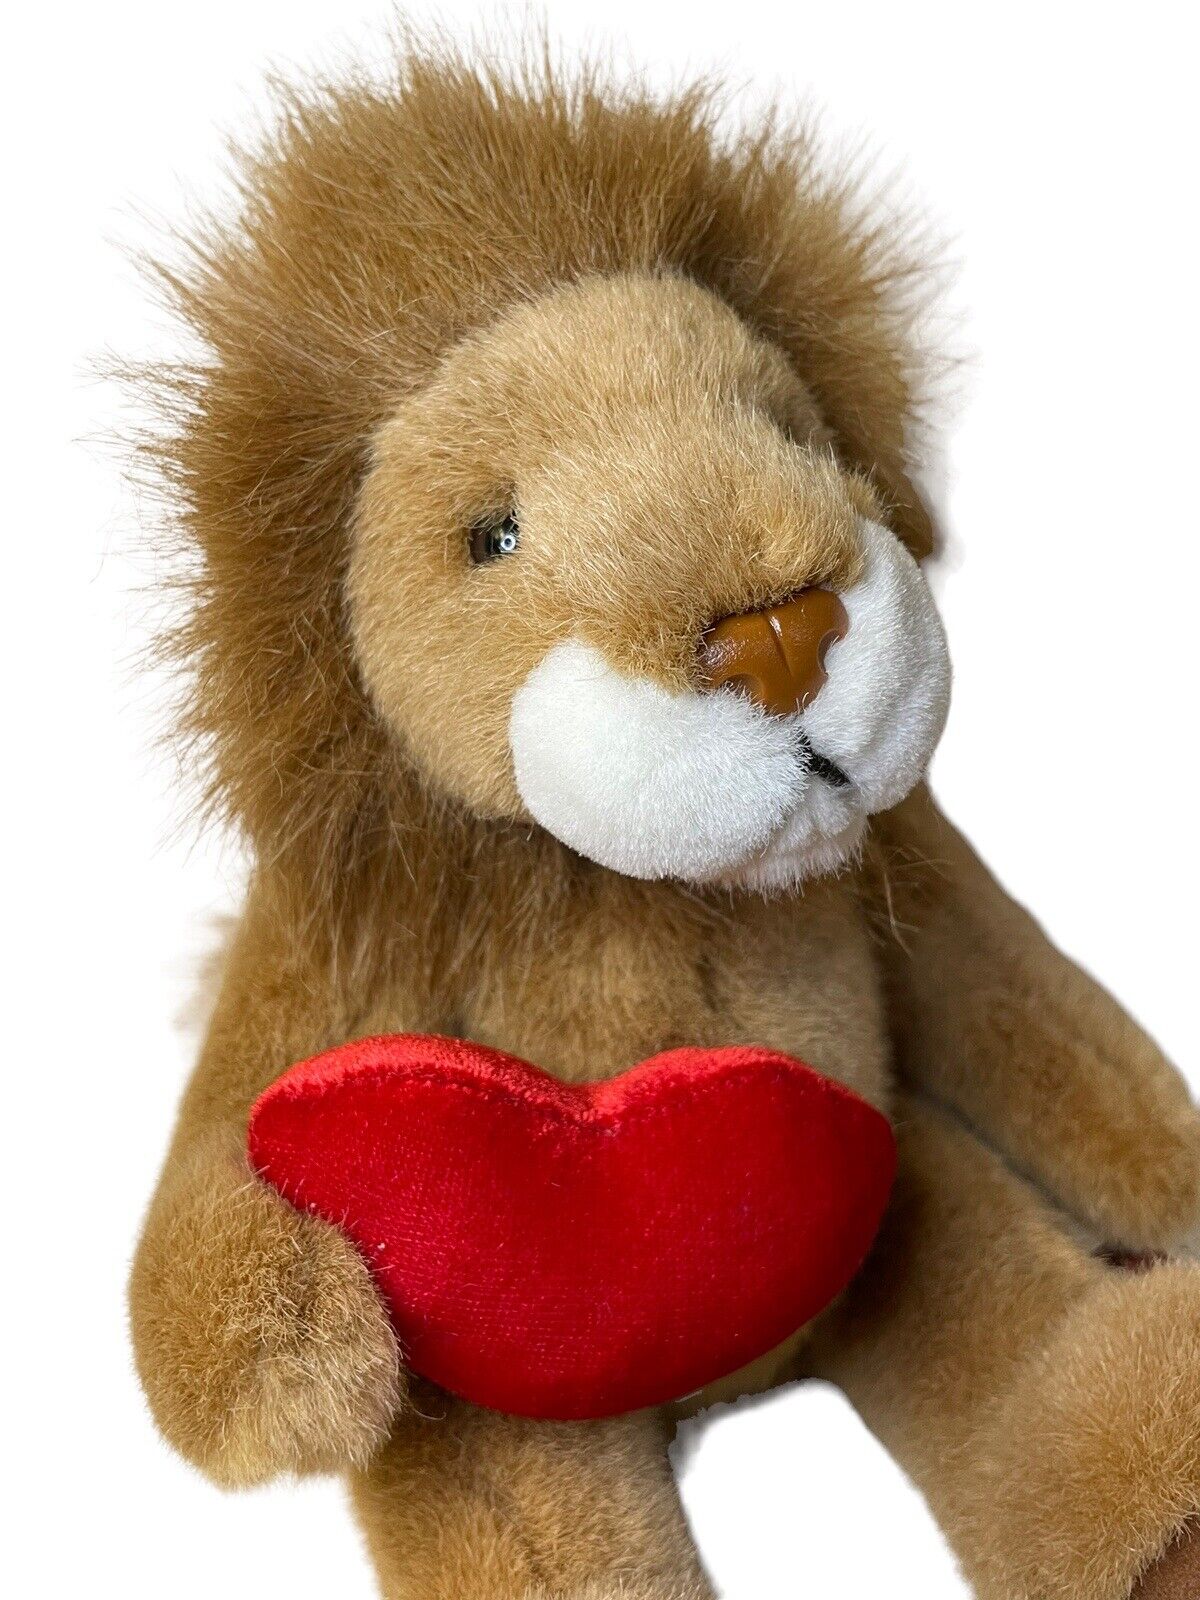 Russ Target 10” Lion Plush With Red Heart Valentine's Day Stuffed Animal Toy  | eBay